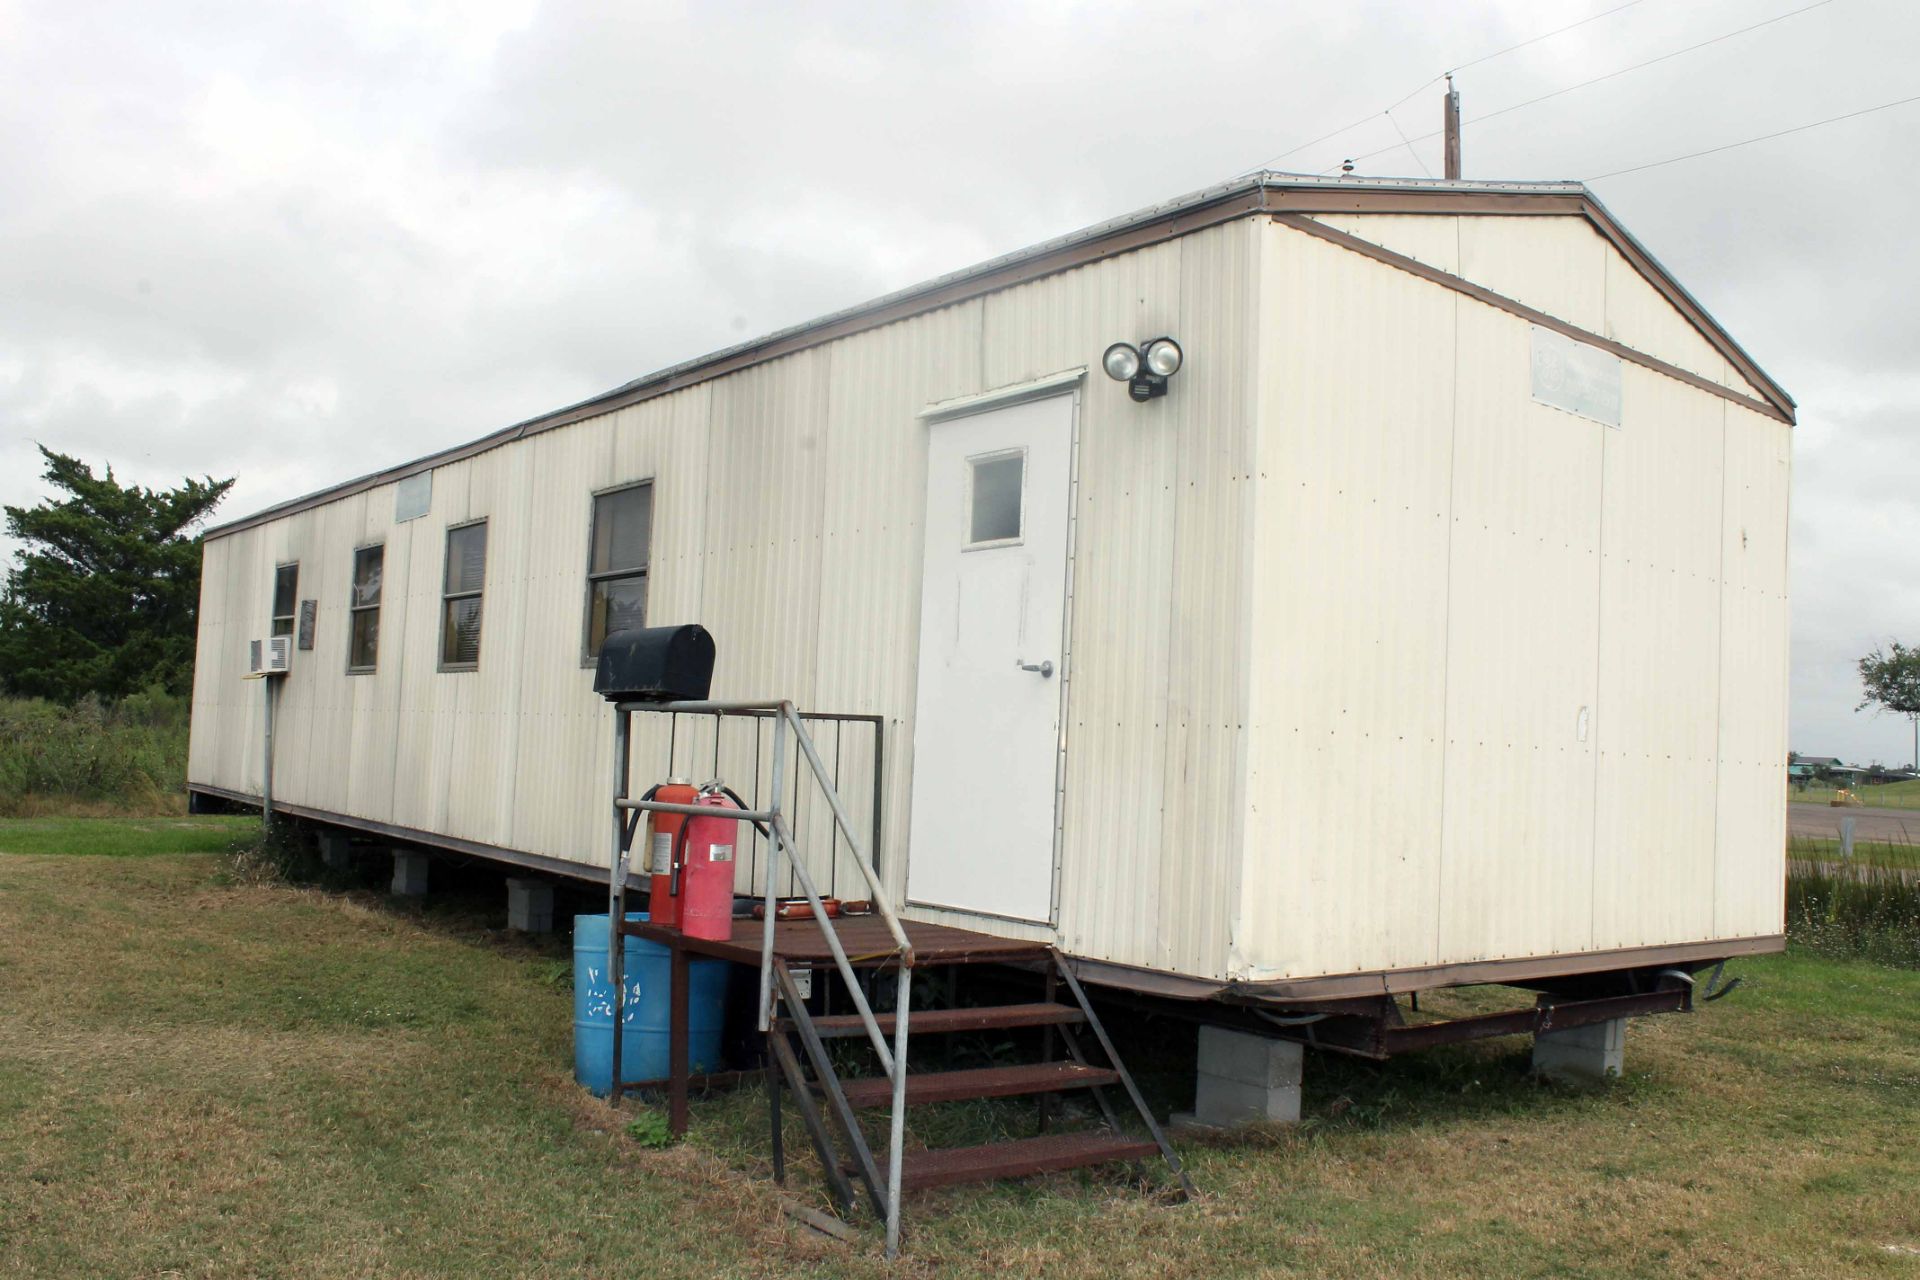 OFFICE TRAILER, with furniture, window a/c units.